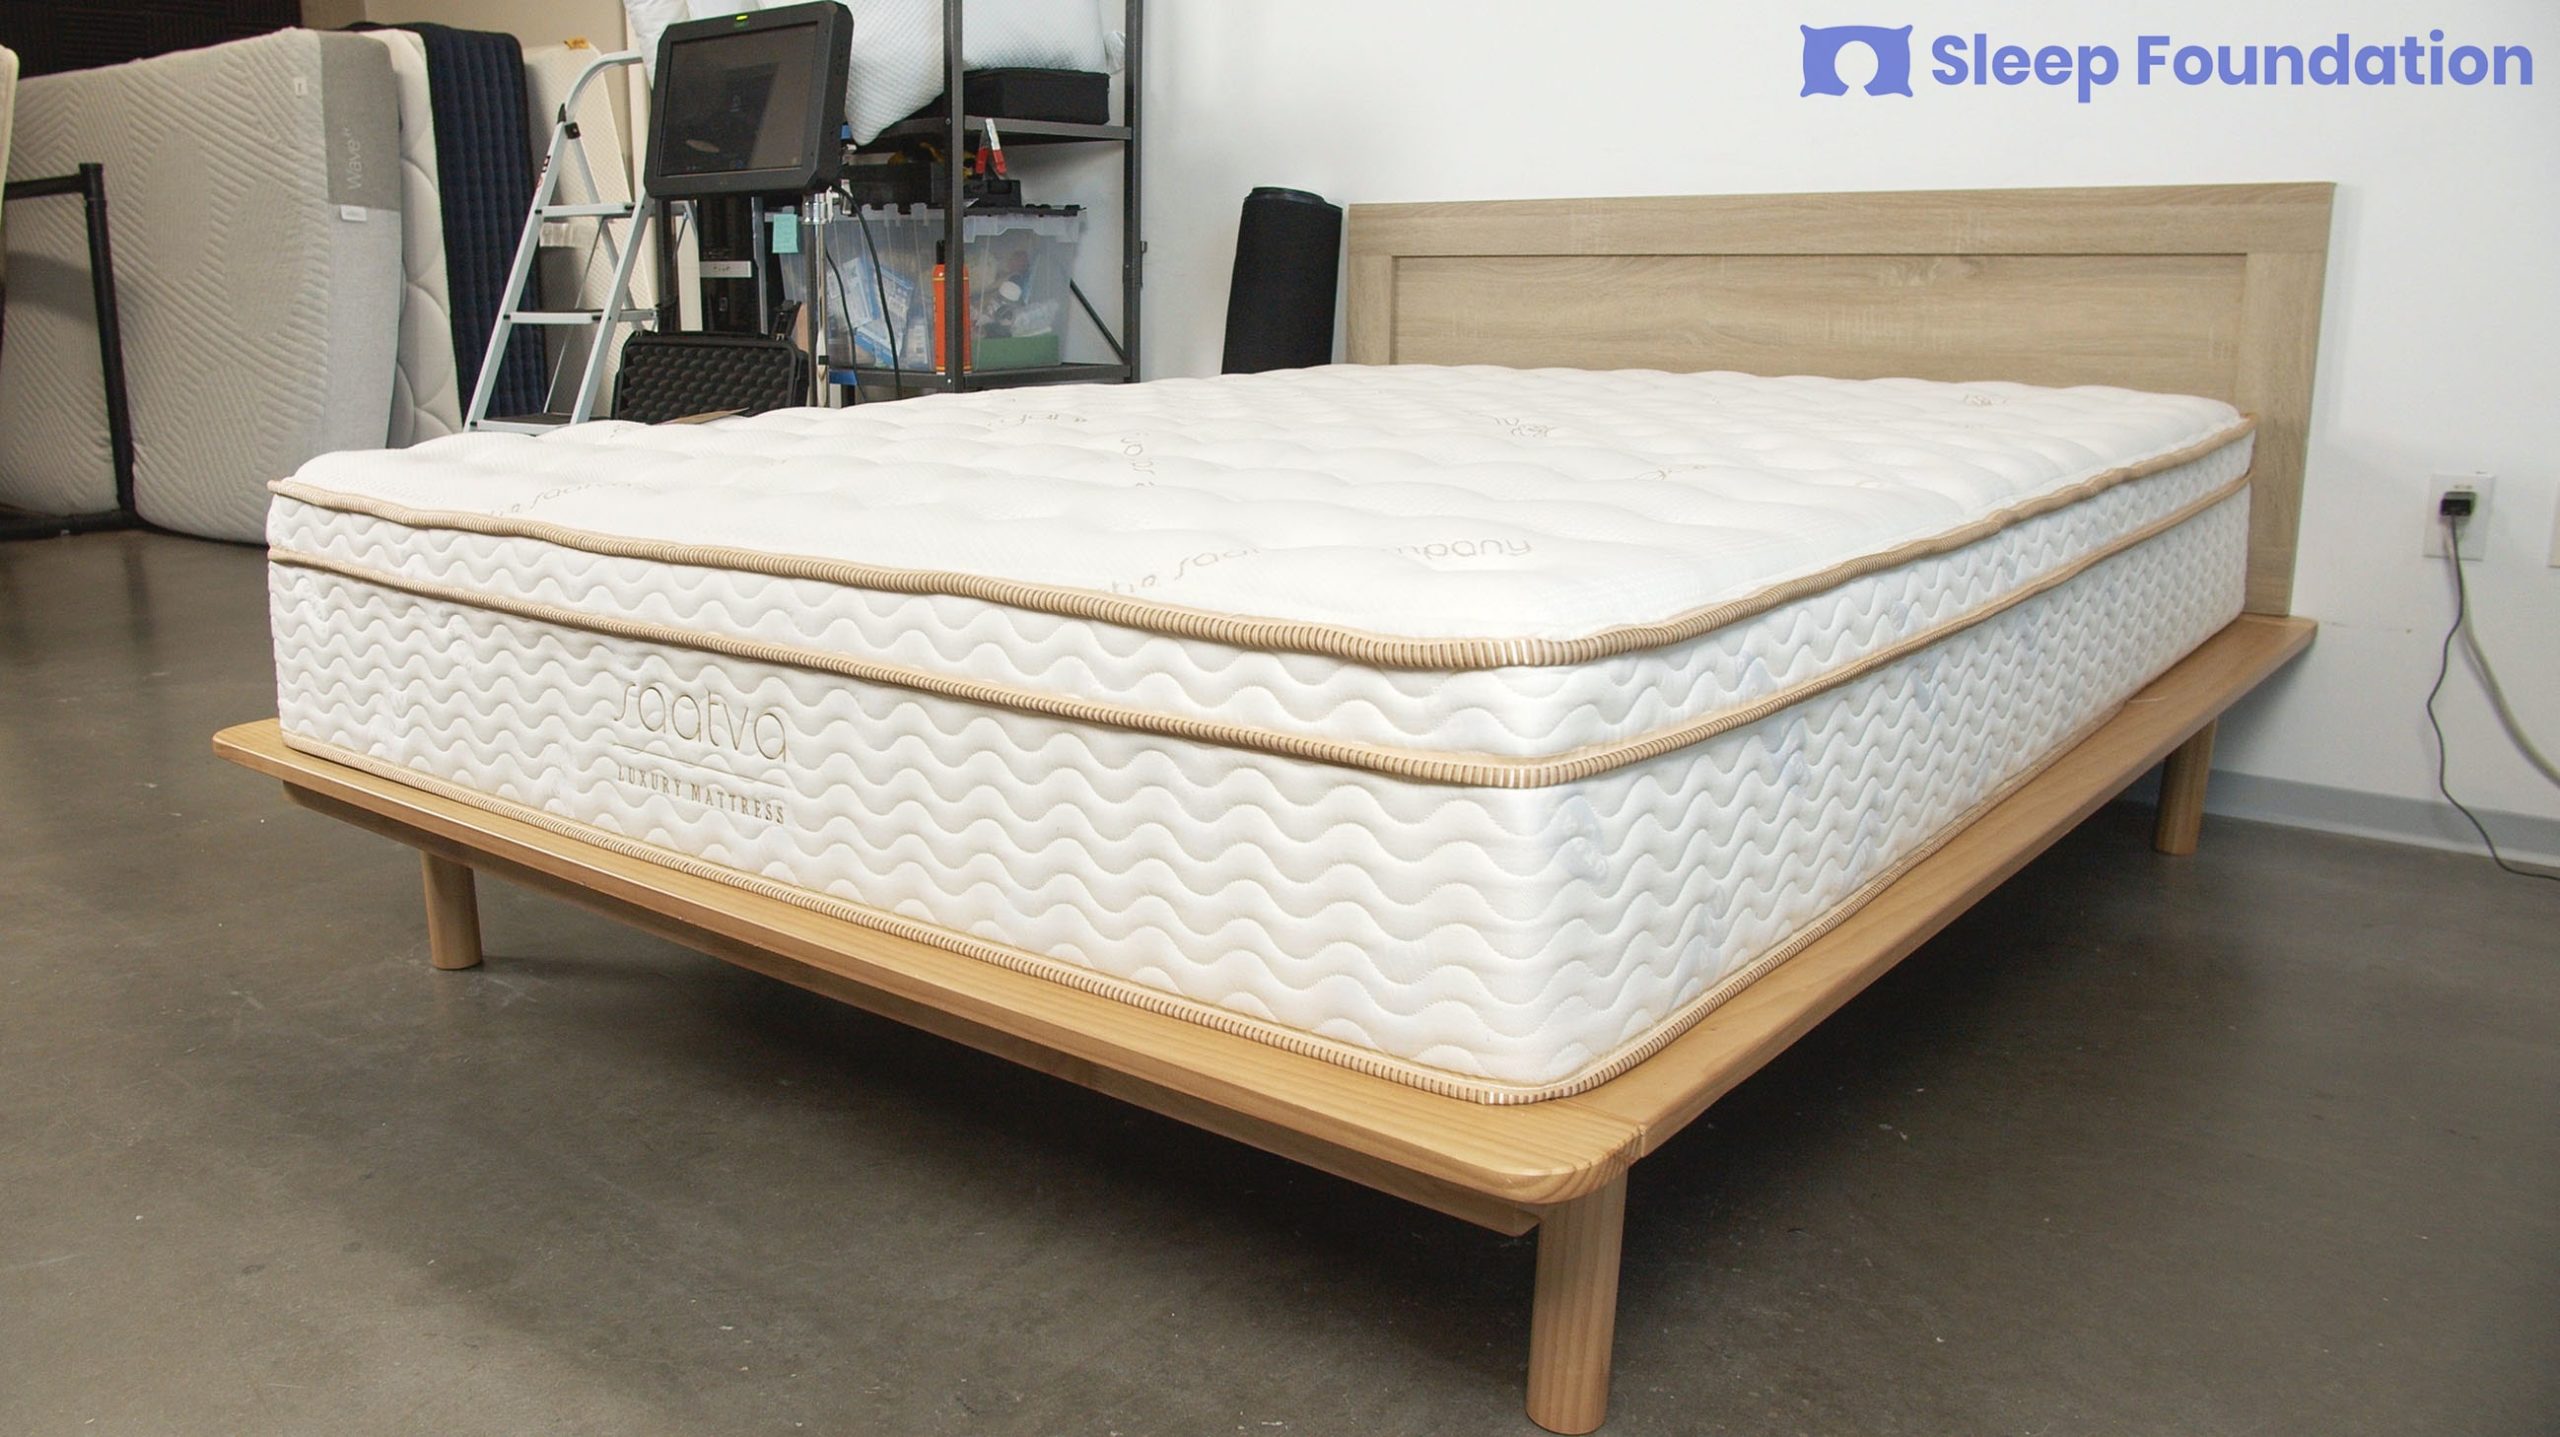 A picture of the Saatva Classic Mattress in Sleep Foundation's test lab.